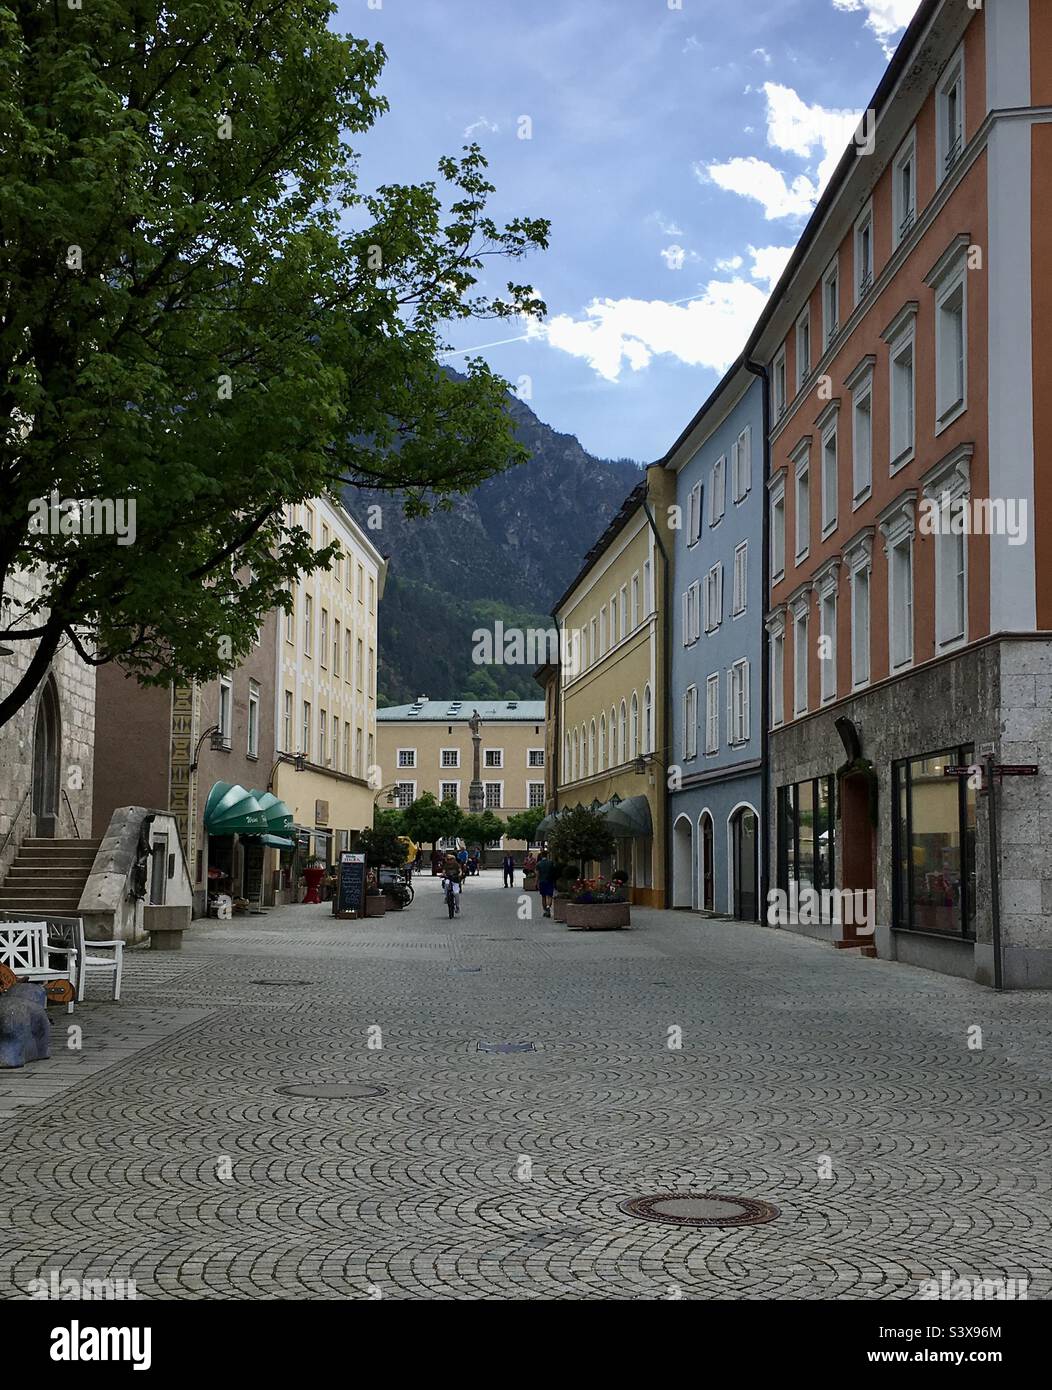 Looking down Poststrasse towards the square and town hall, Bad Reichenhall, Bavaria, Germany. Stock Photo